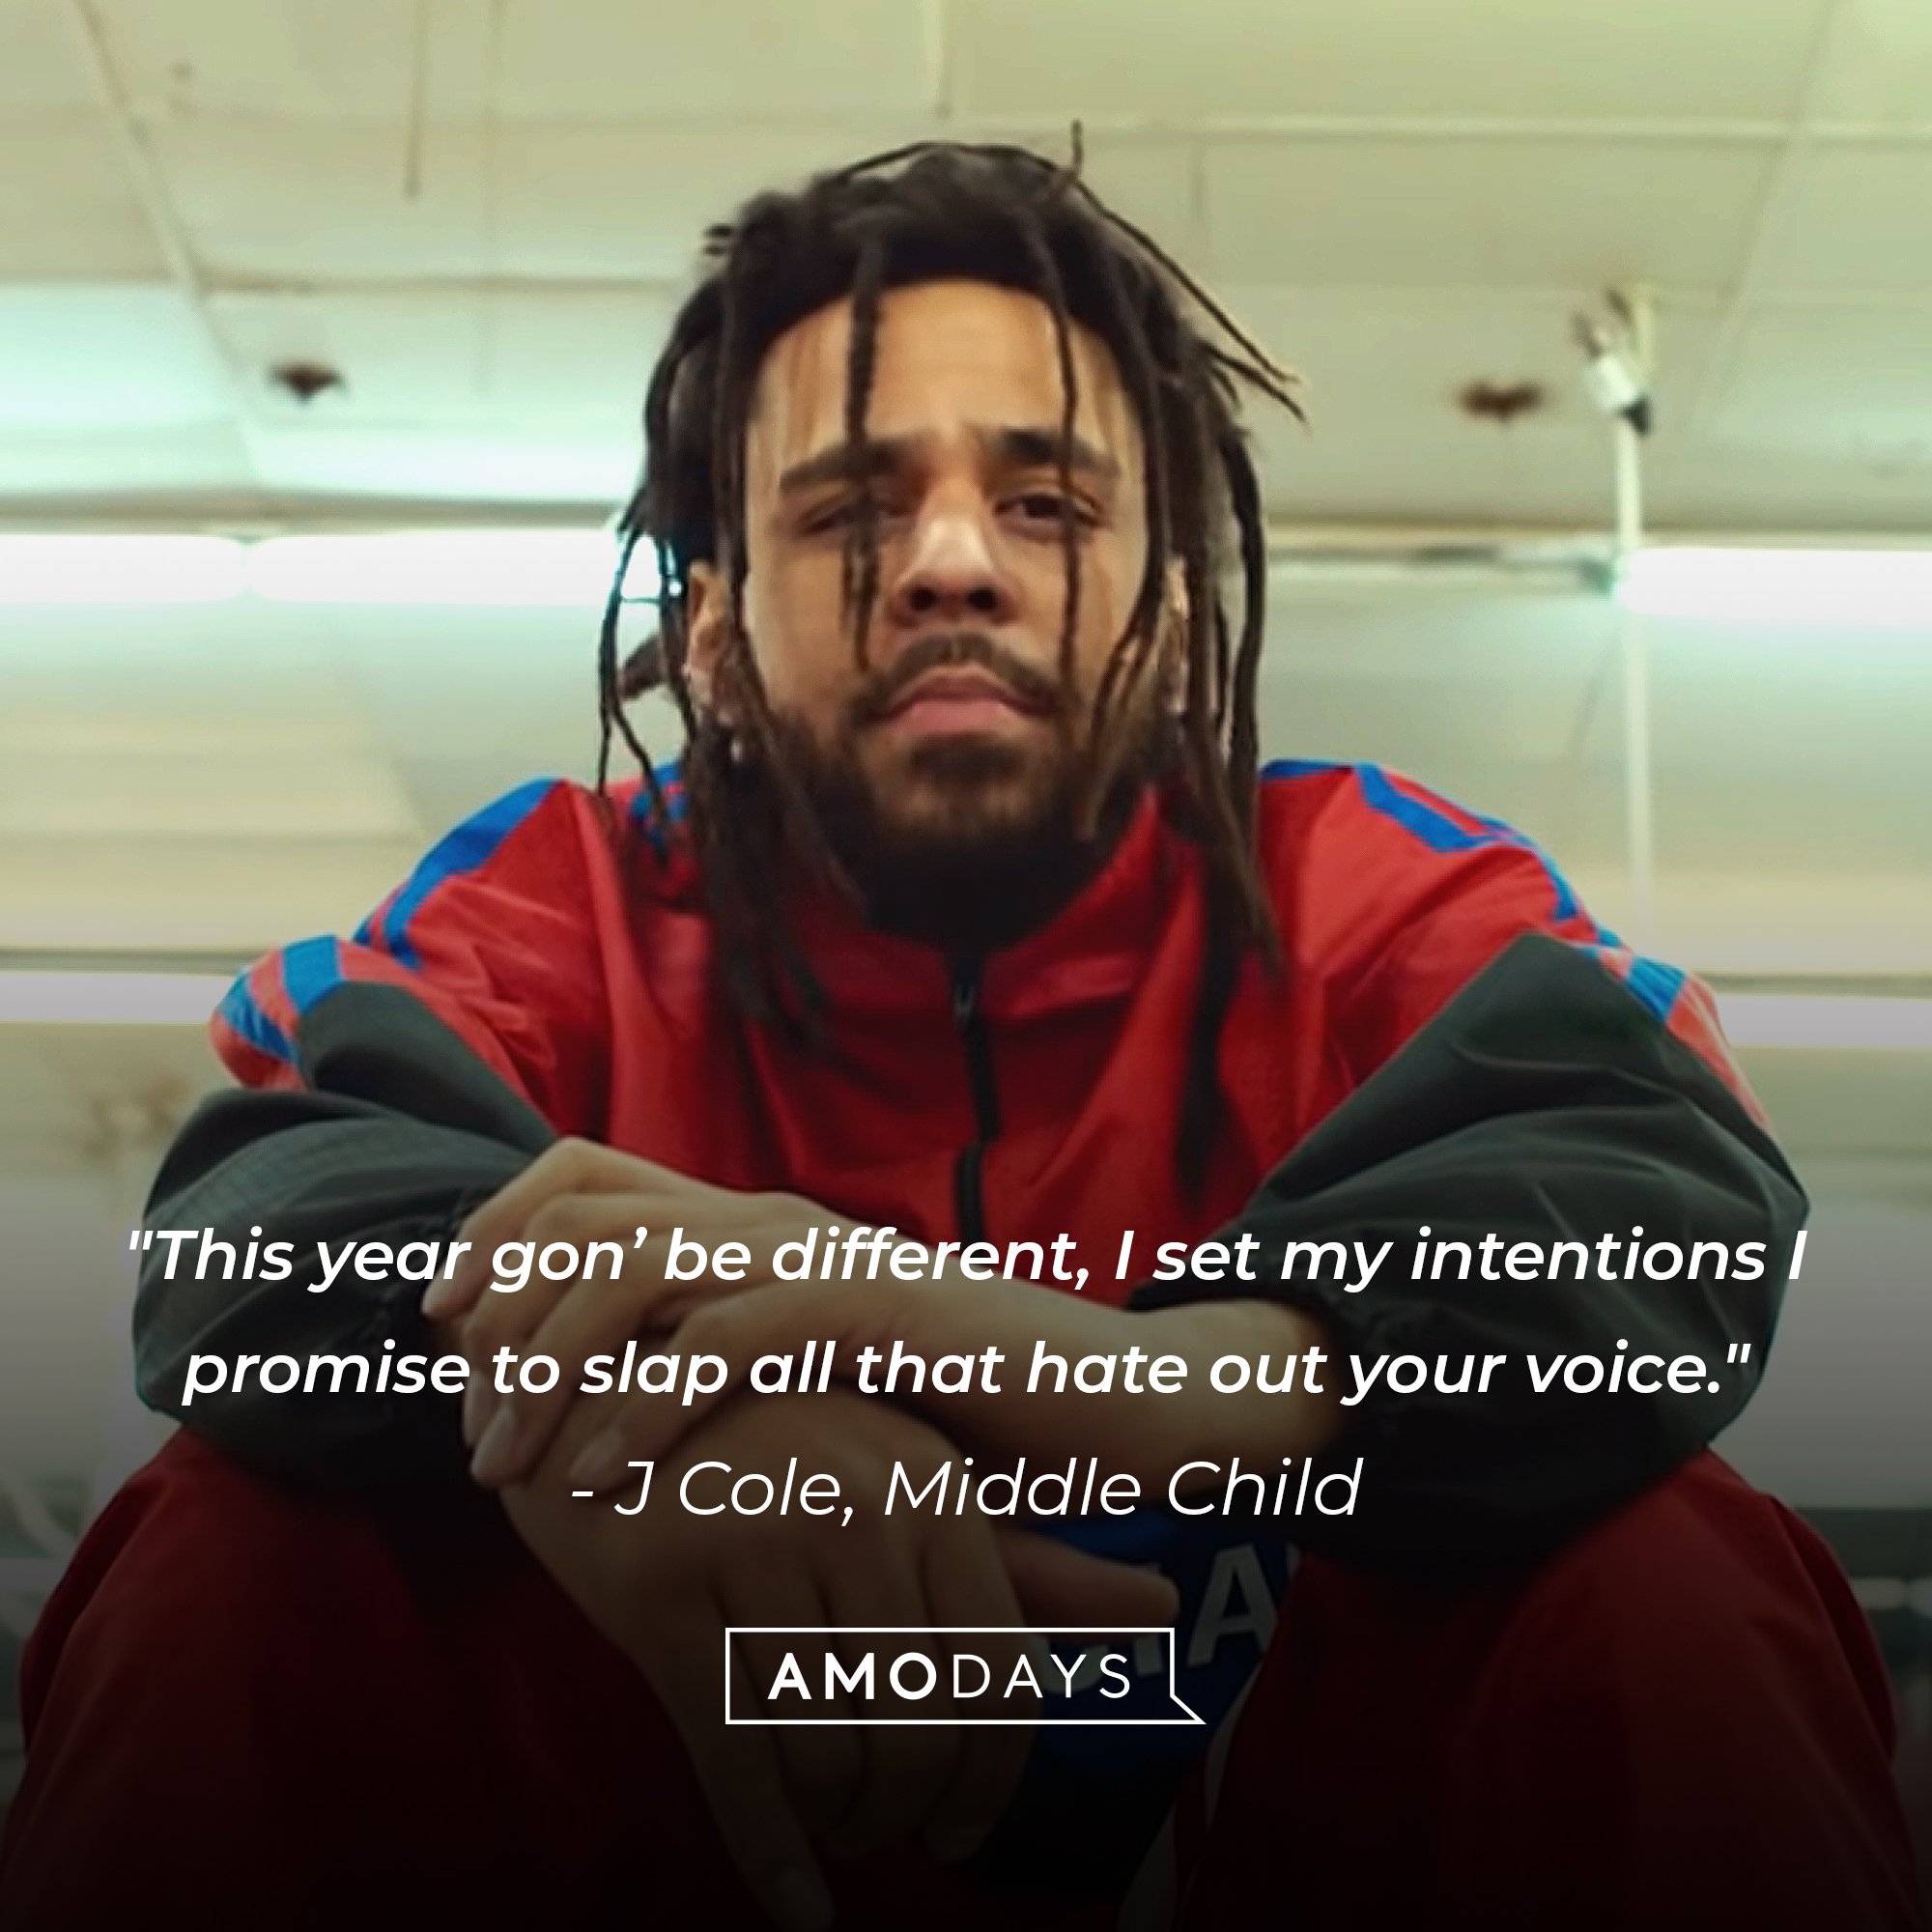 J Cole's quote: "This year gon’ be different, I set my intentions I promise to slap all that hate out your voice." | Image: 